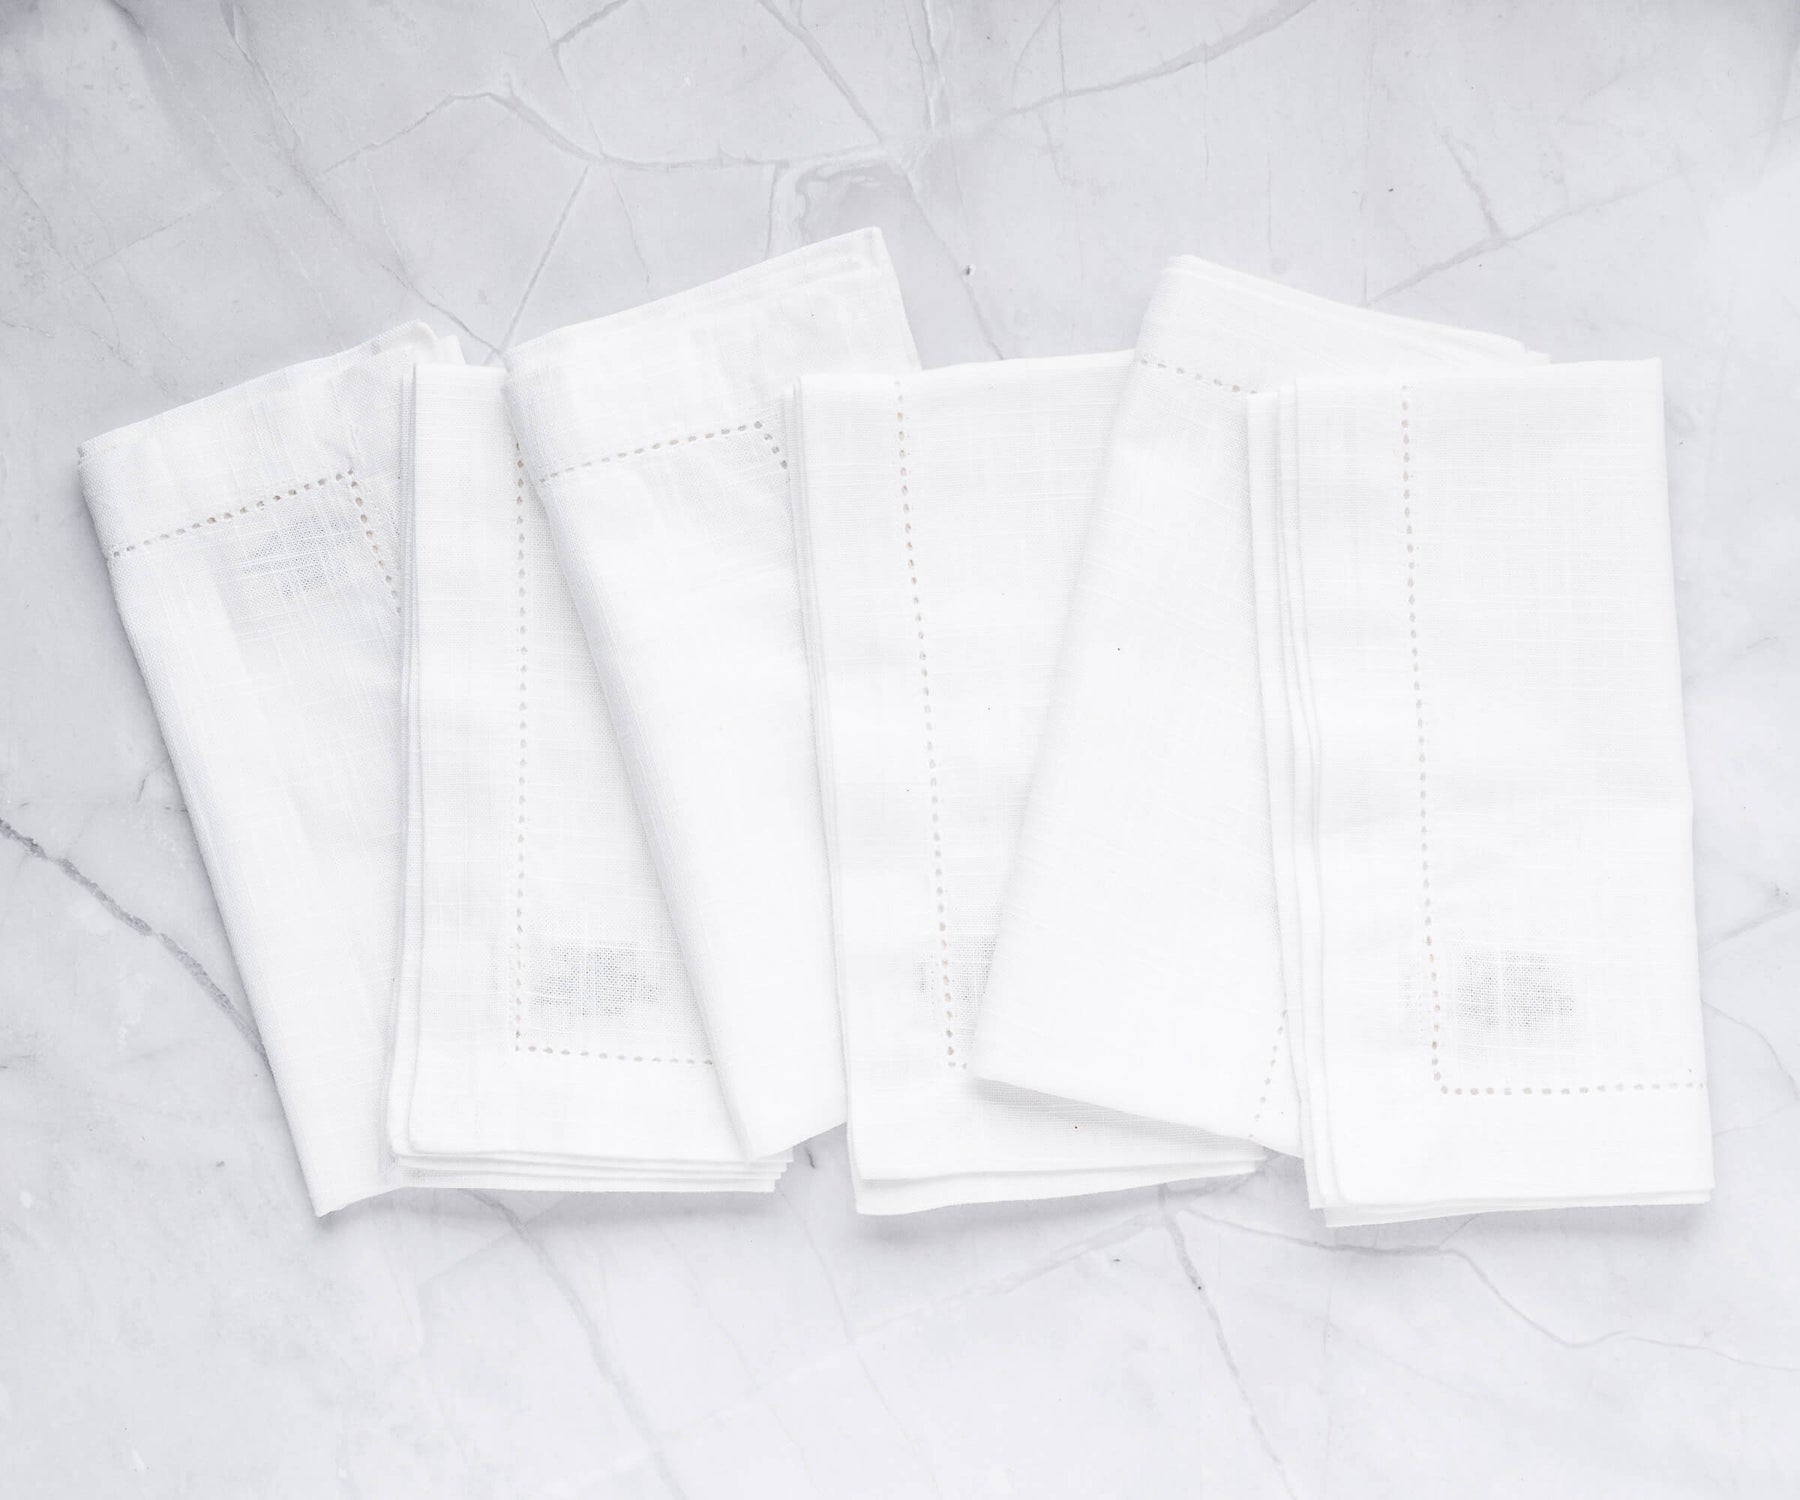  MLMW Thick Cotton Linen Napkins Set of 6 Pack Soft Cloth Dinner  Napkins 17×17 Bulk Rustic Table Napkins for Wedding Party Table  Decoration White : Home & Kitchen